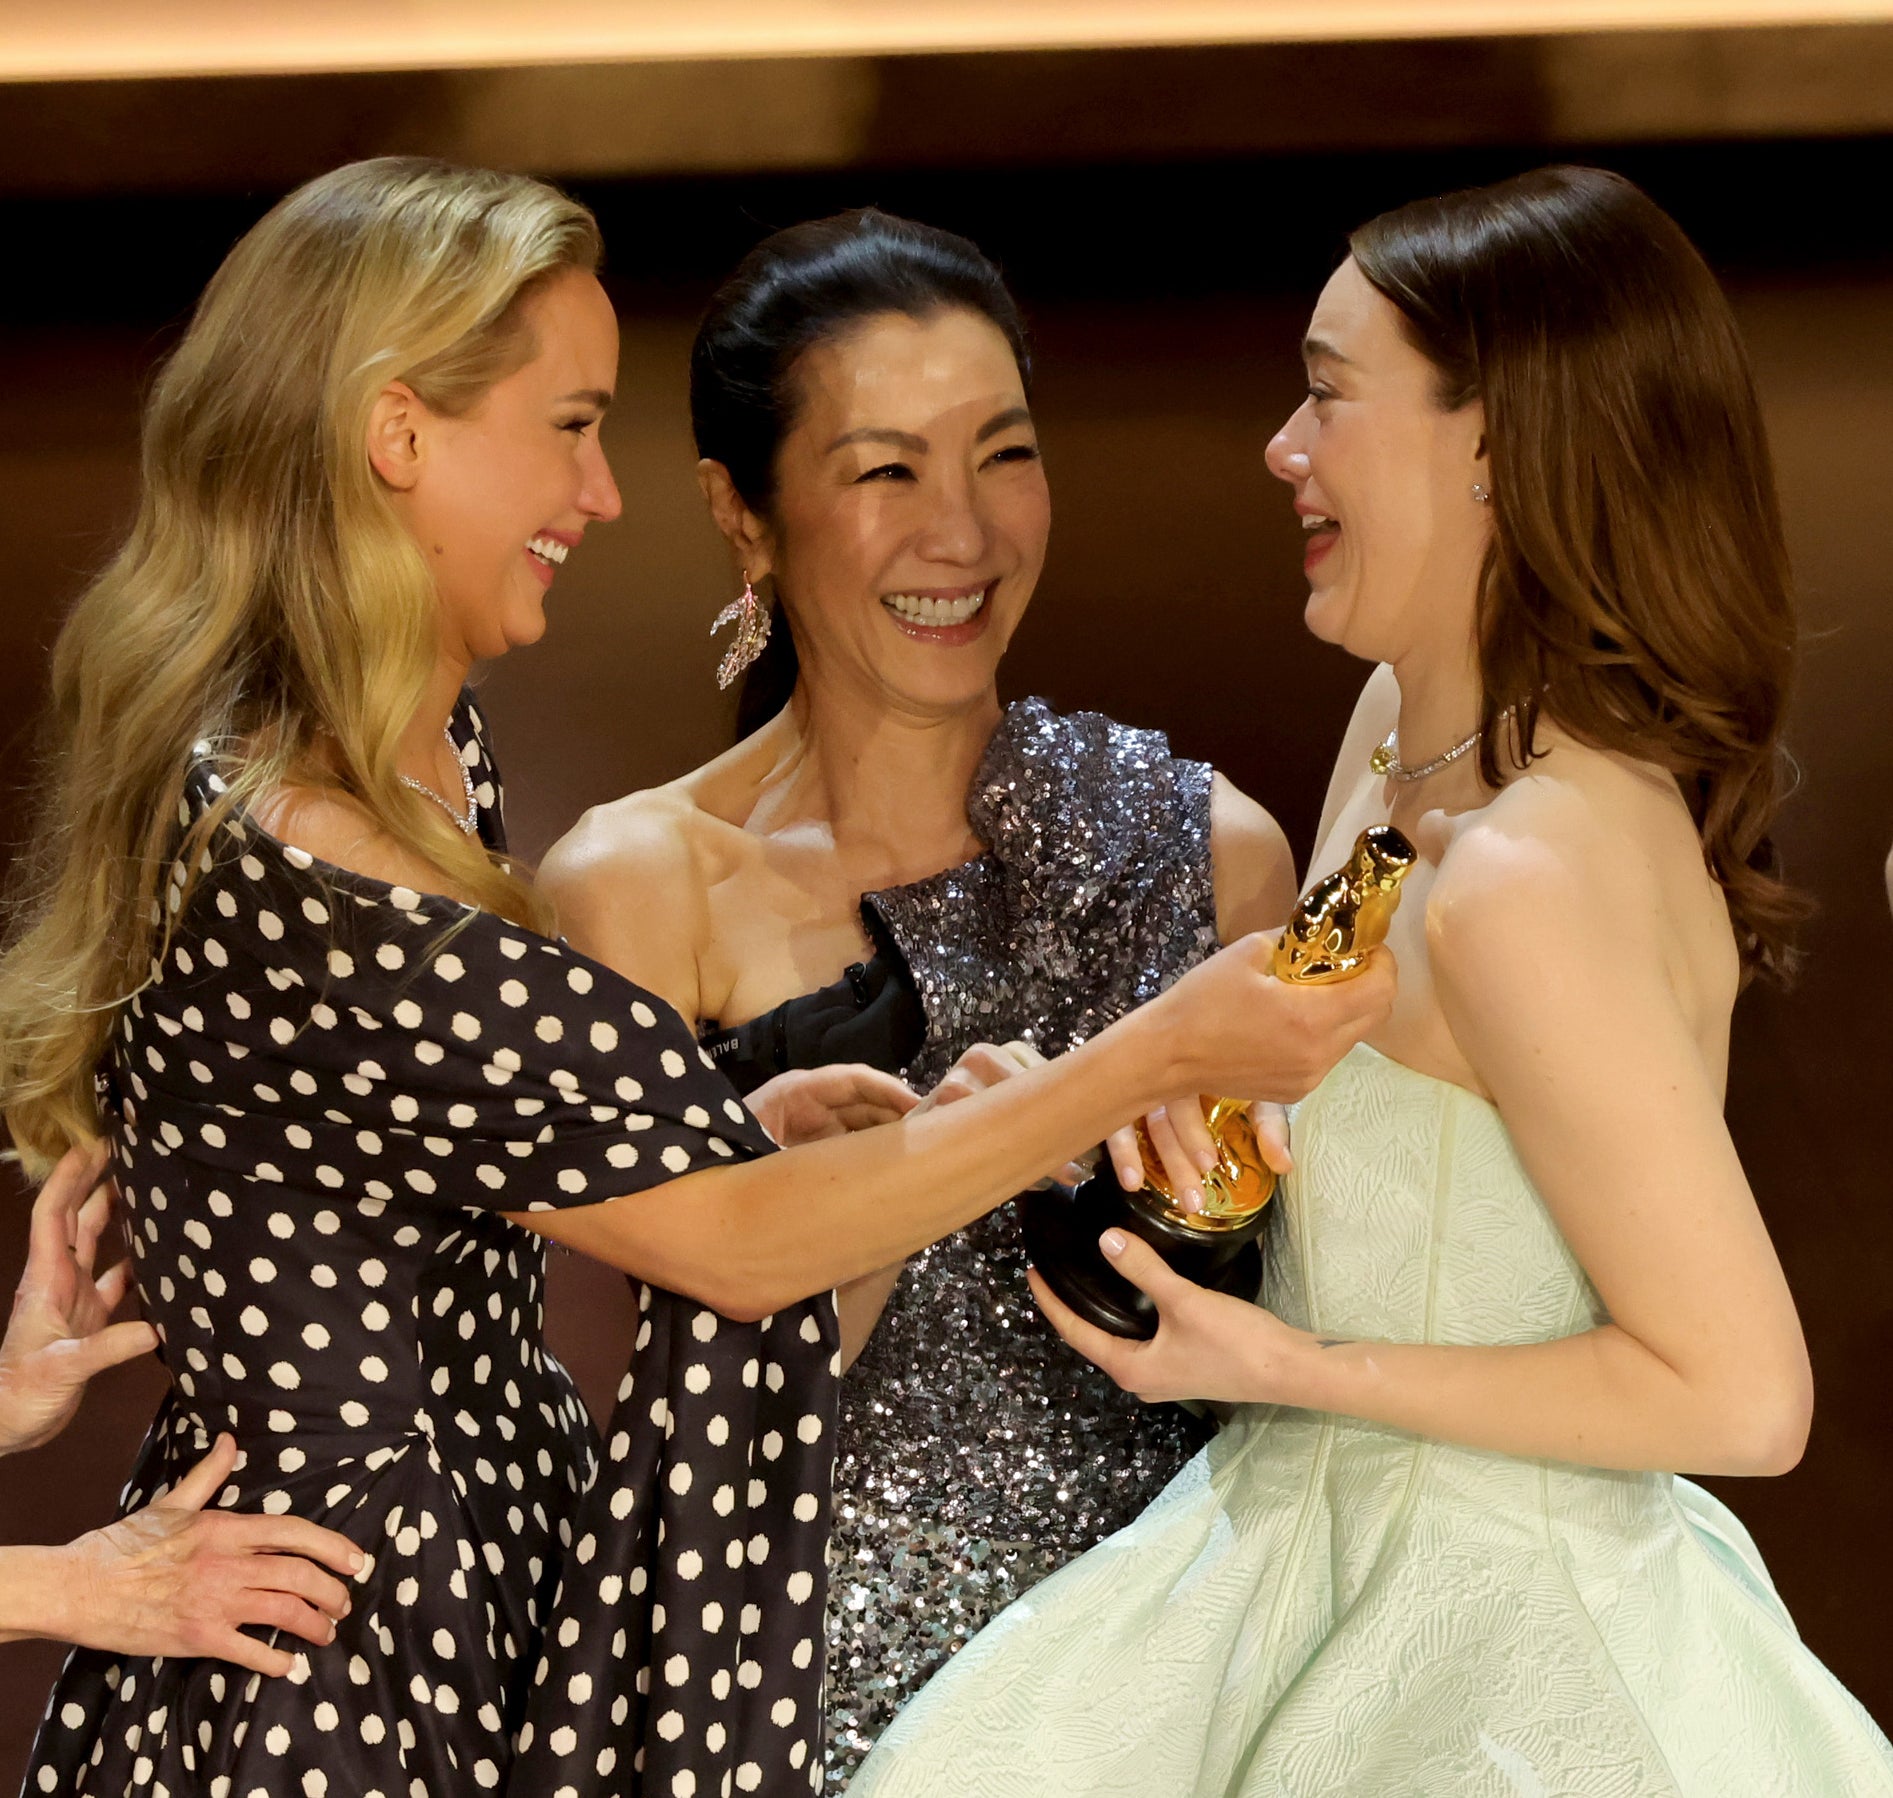 Jennifer Lawrence handing Emma Stone an Oscar while Michelle Yeoh looks on